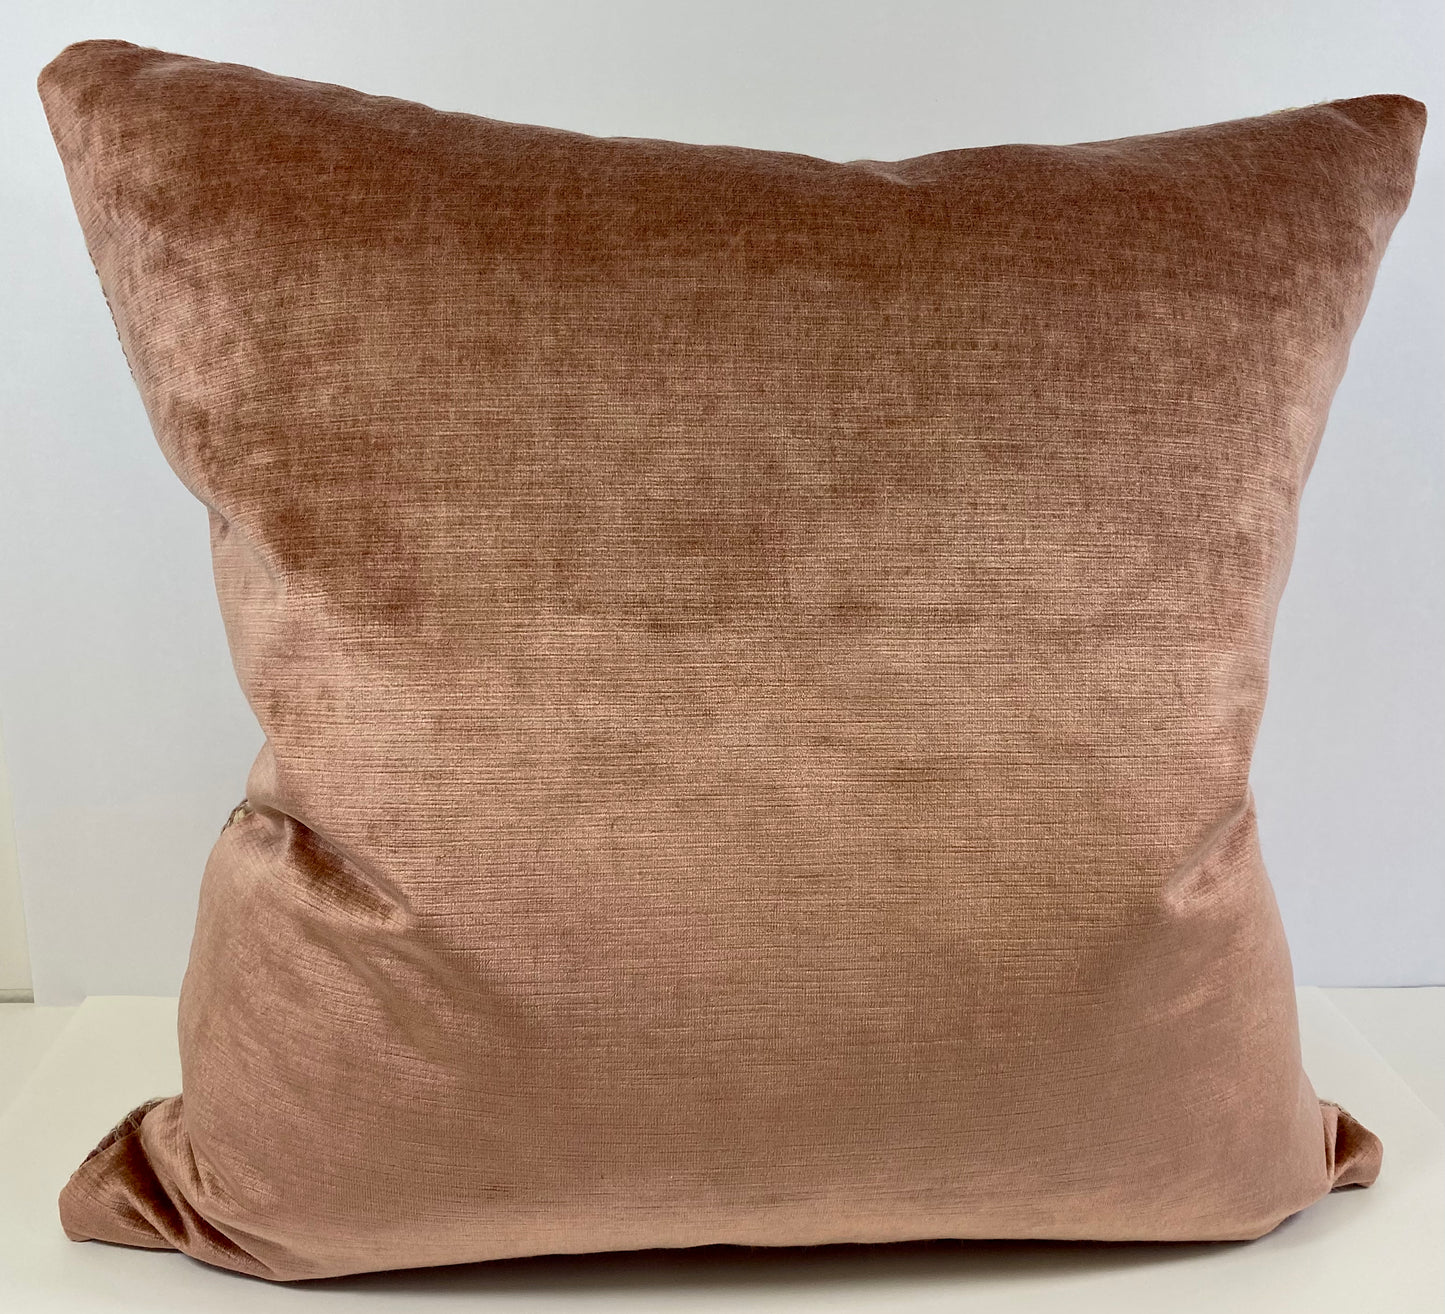 Luxury Pillow -  24" x 24" -  Madison Club - Ribbon Rose; Ribbons of wool and cotton